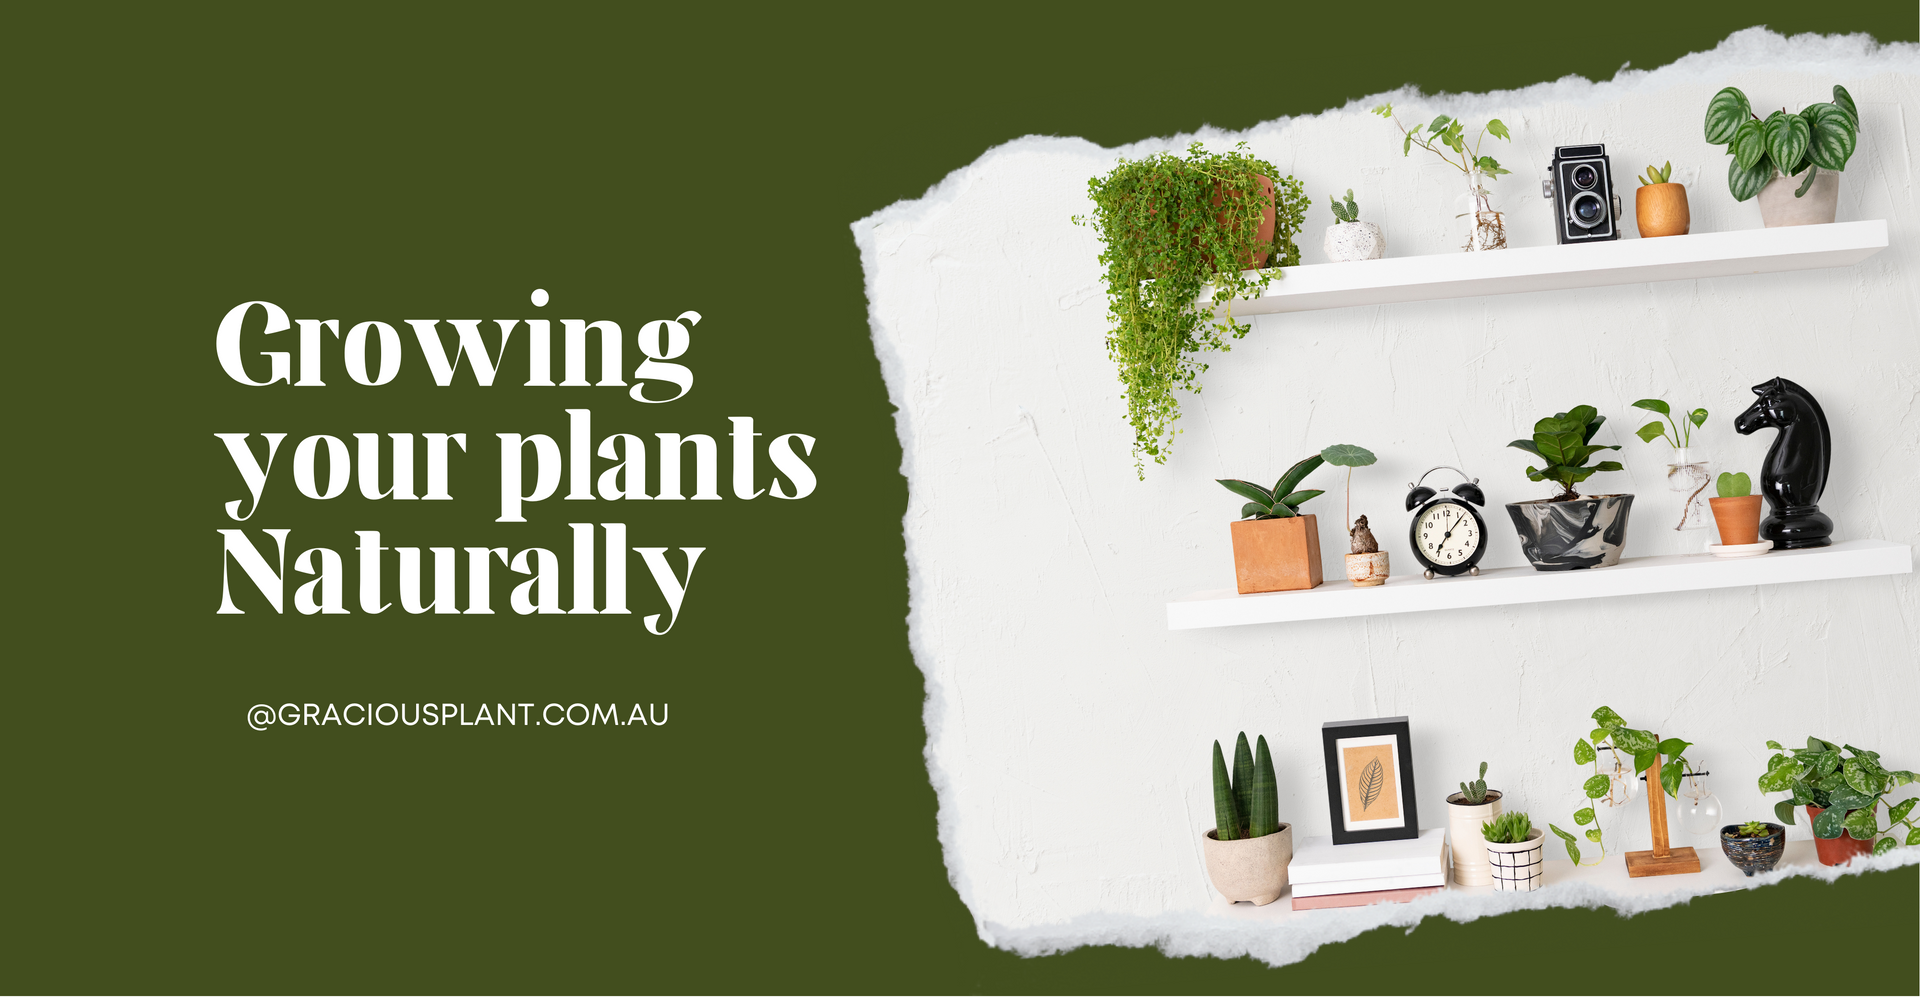 Growing your plants naturally